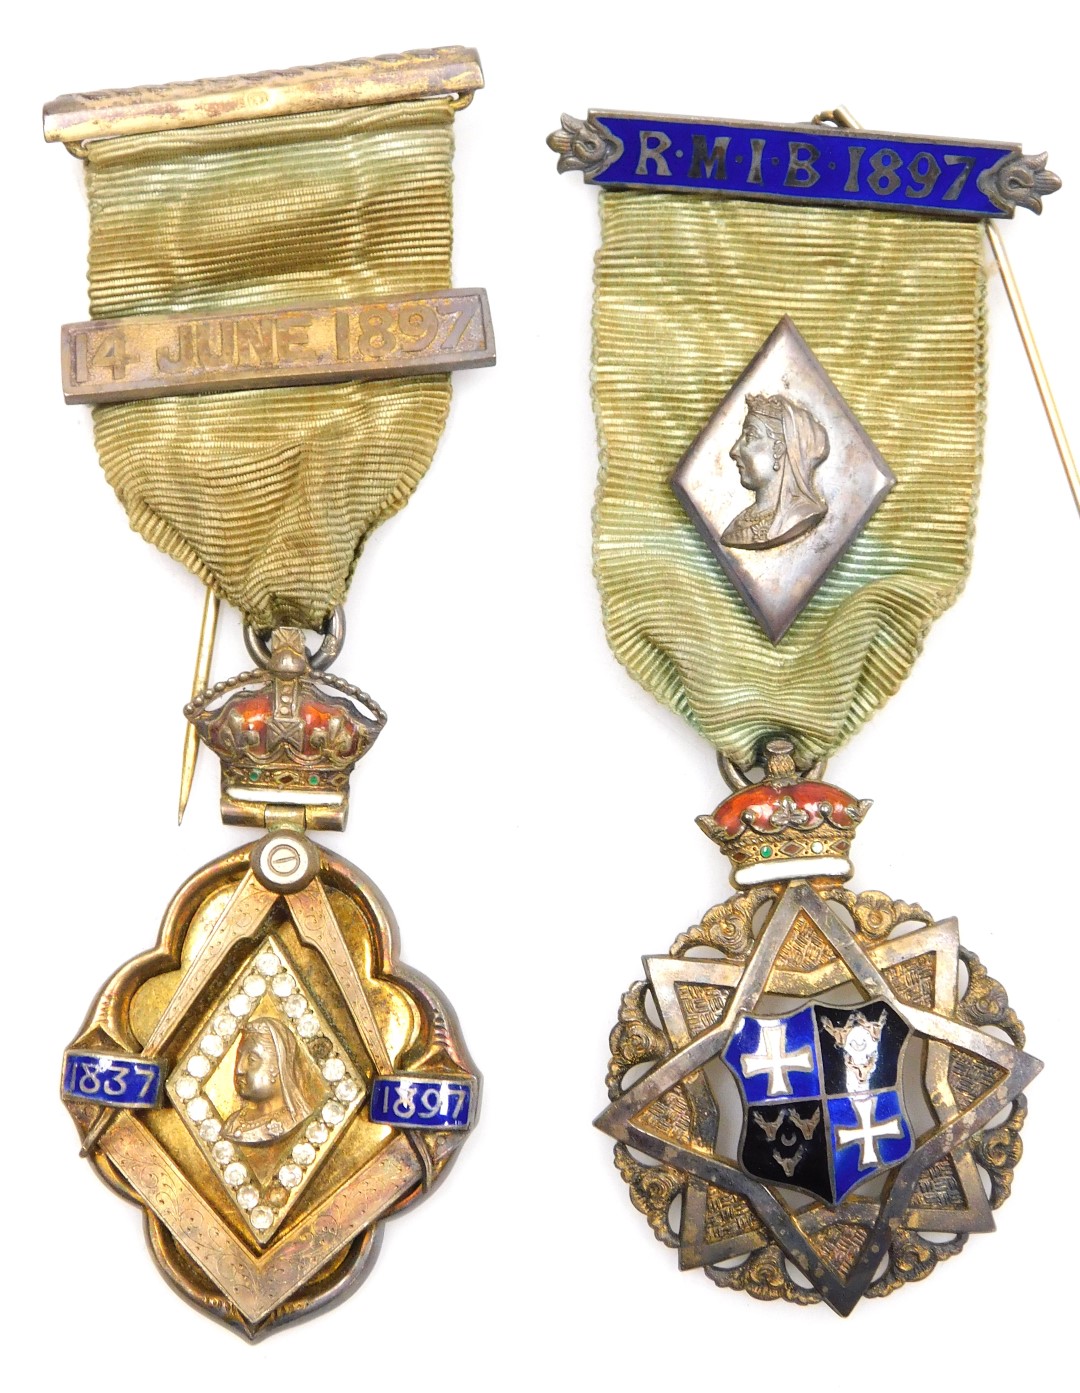 Two Victorian Masonic jewels, to commemorate the golden and diamond jubilees of Her Majesty Queen Vi - Image 4 of 5